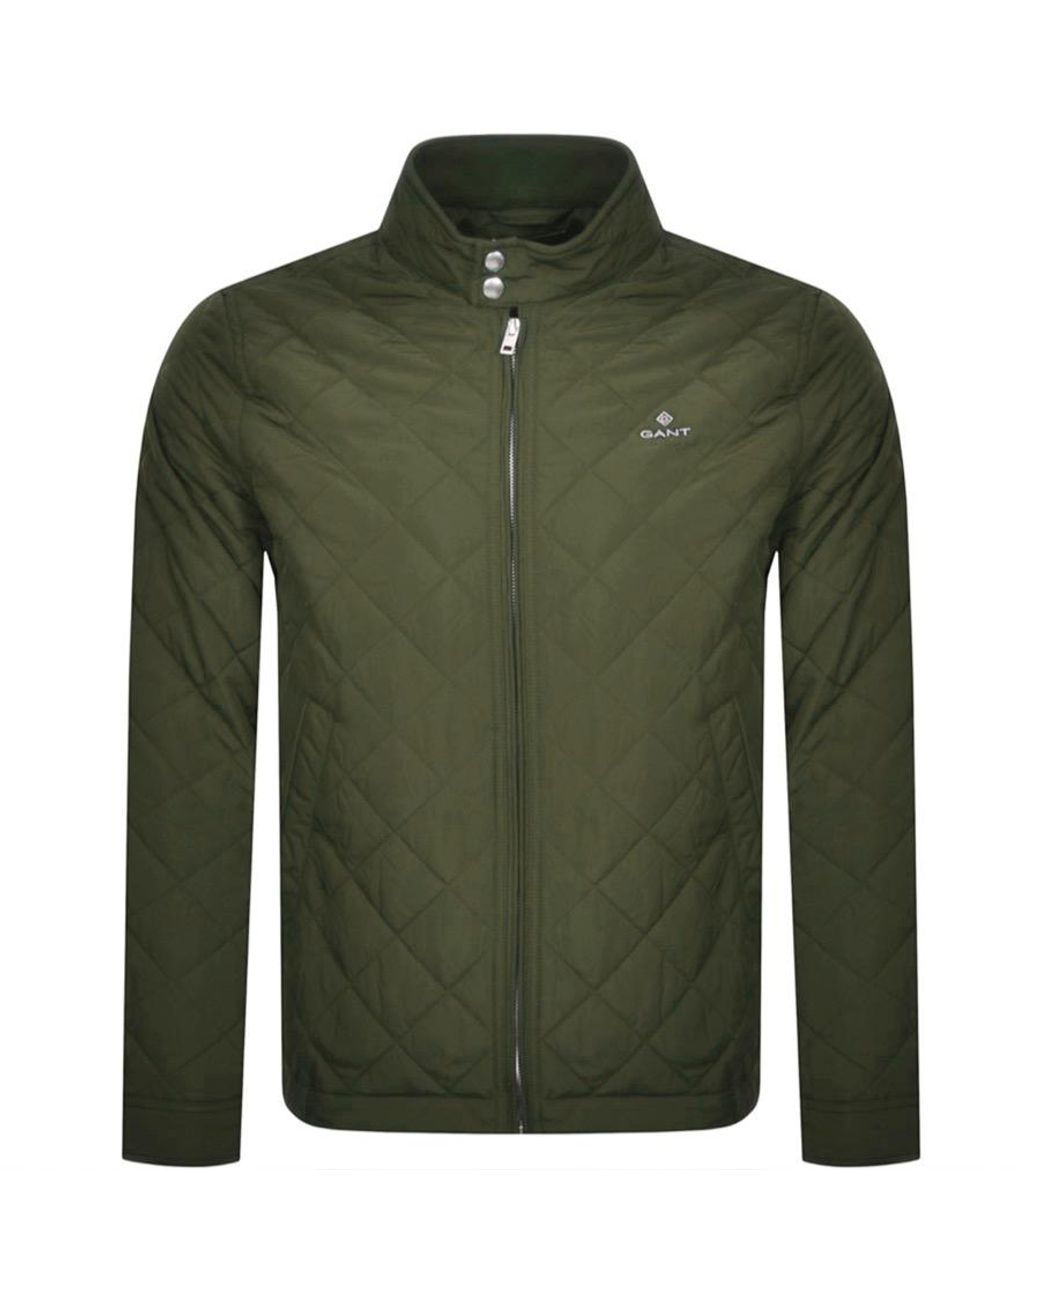 GANT Synthetic Quilted Windcheater Jacket in Green for Men - Lyst